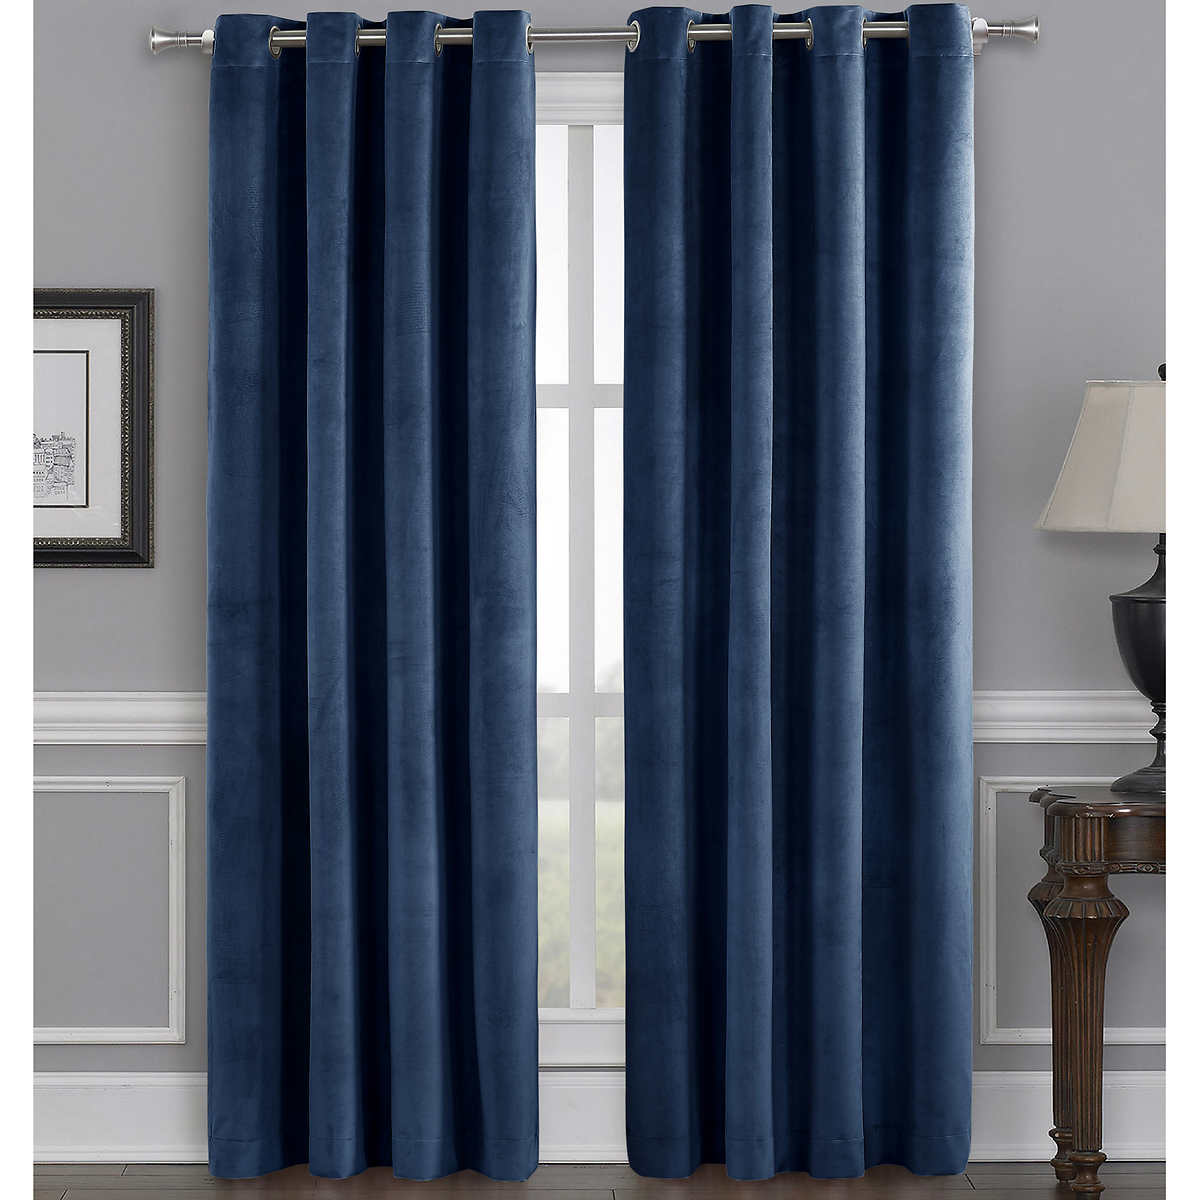 PREMIUM BLACK OUT Curtains Ring Pair of Eyelet Fully Lined Thermal NO LIGHT Entr 